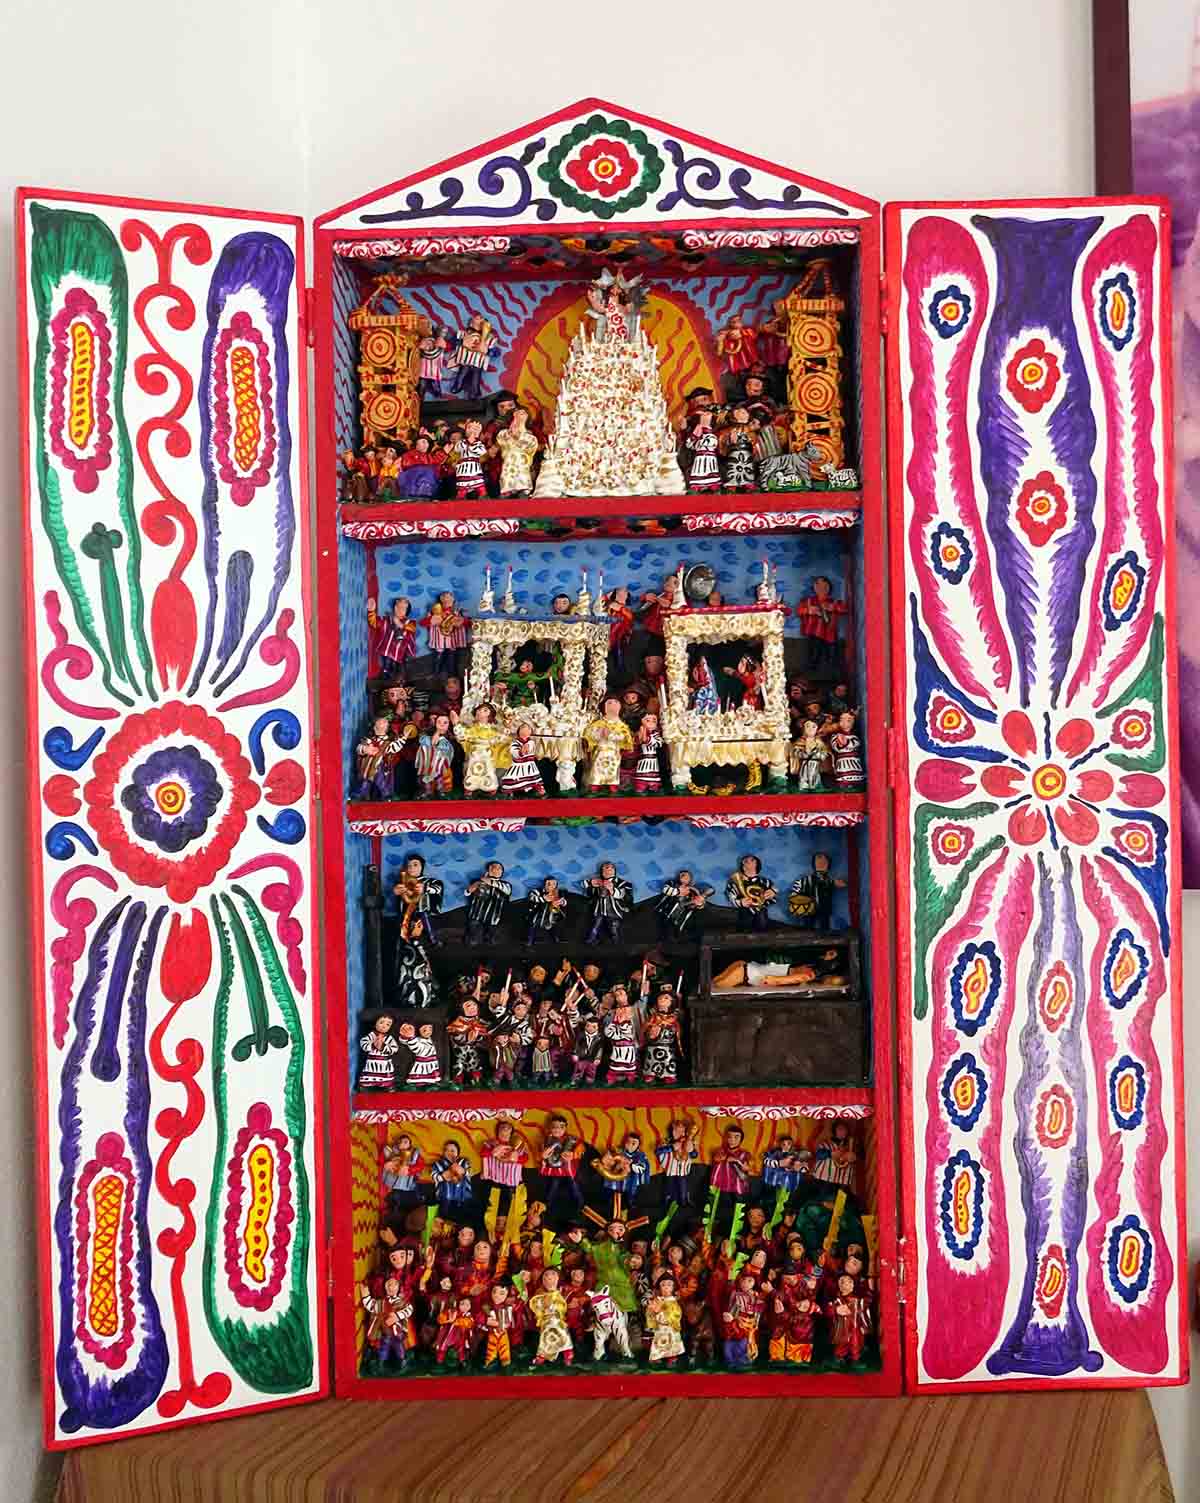 An altar-like retablo with colorful hand-painted designs on the doors and hand-carved figures inside